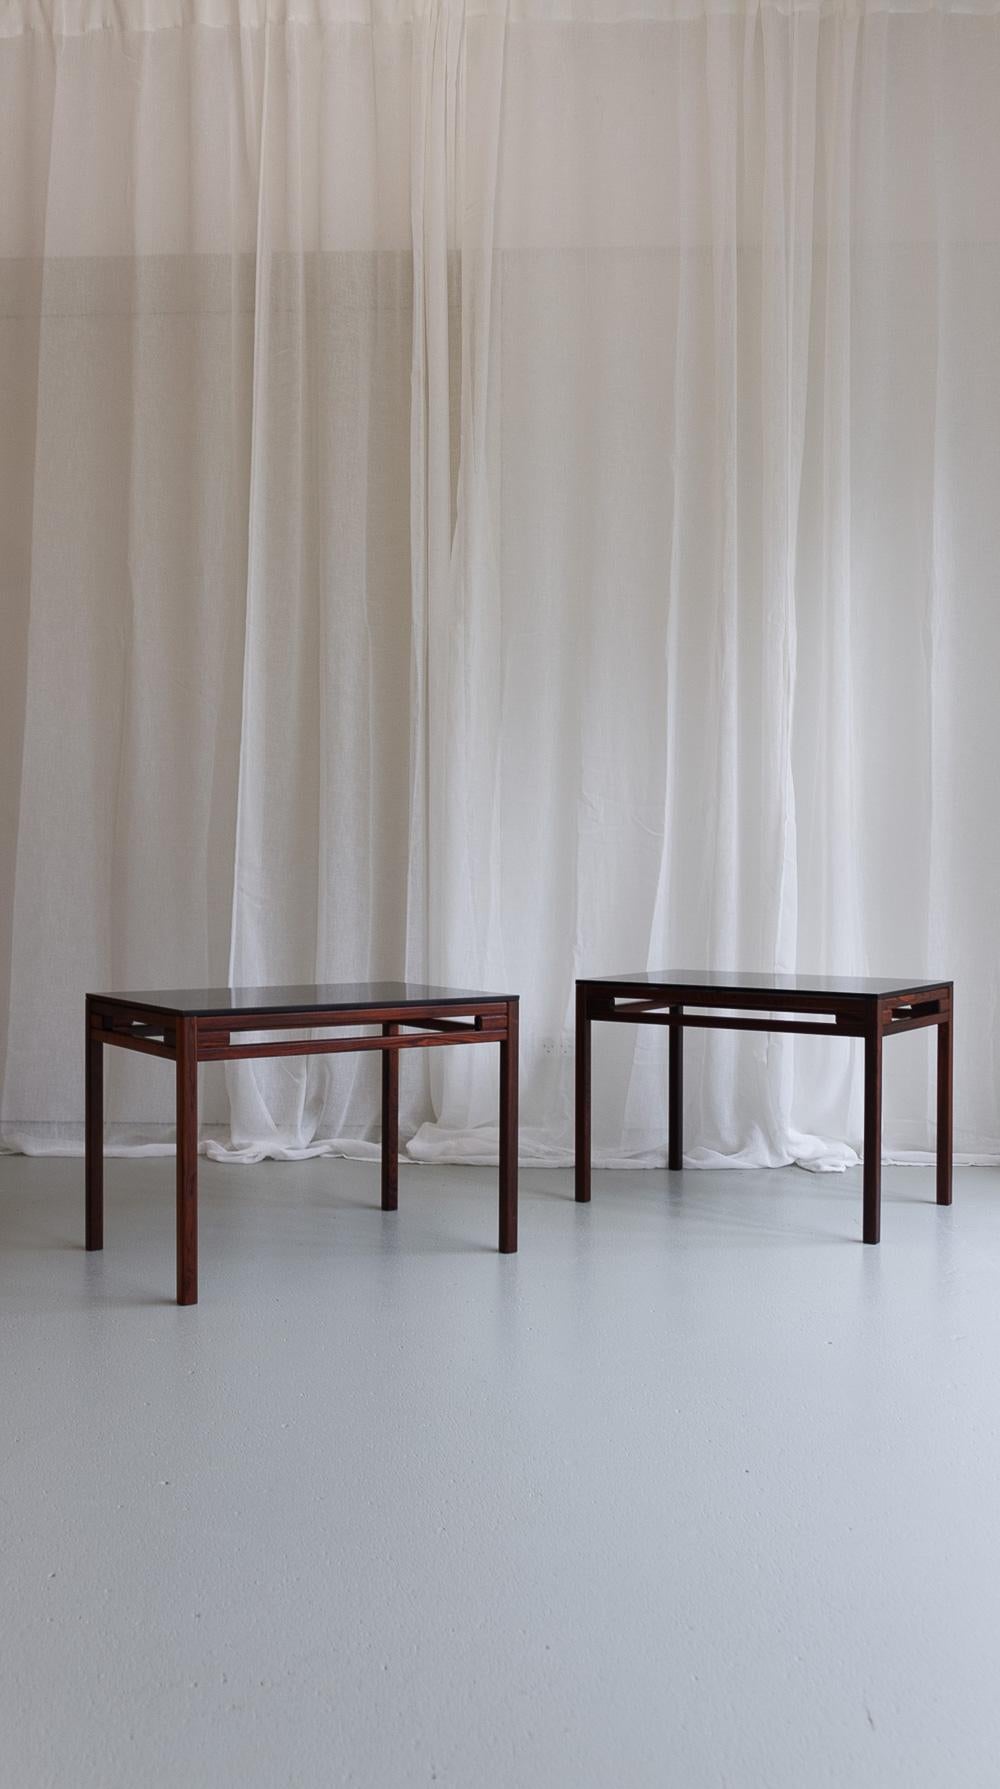 Danish Modern Side Tables in Rosewood and Glass, 1960s. Set of 2. For Sale 9